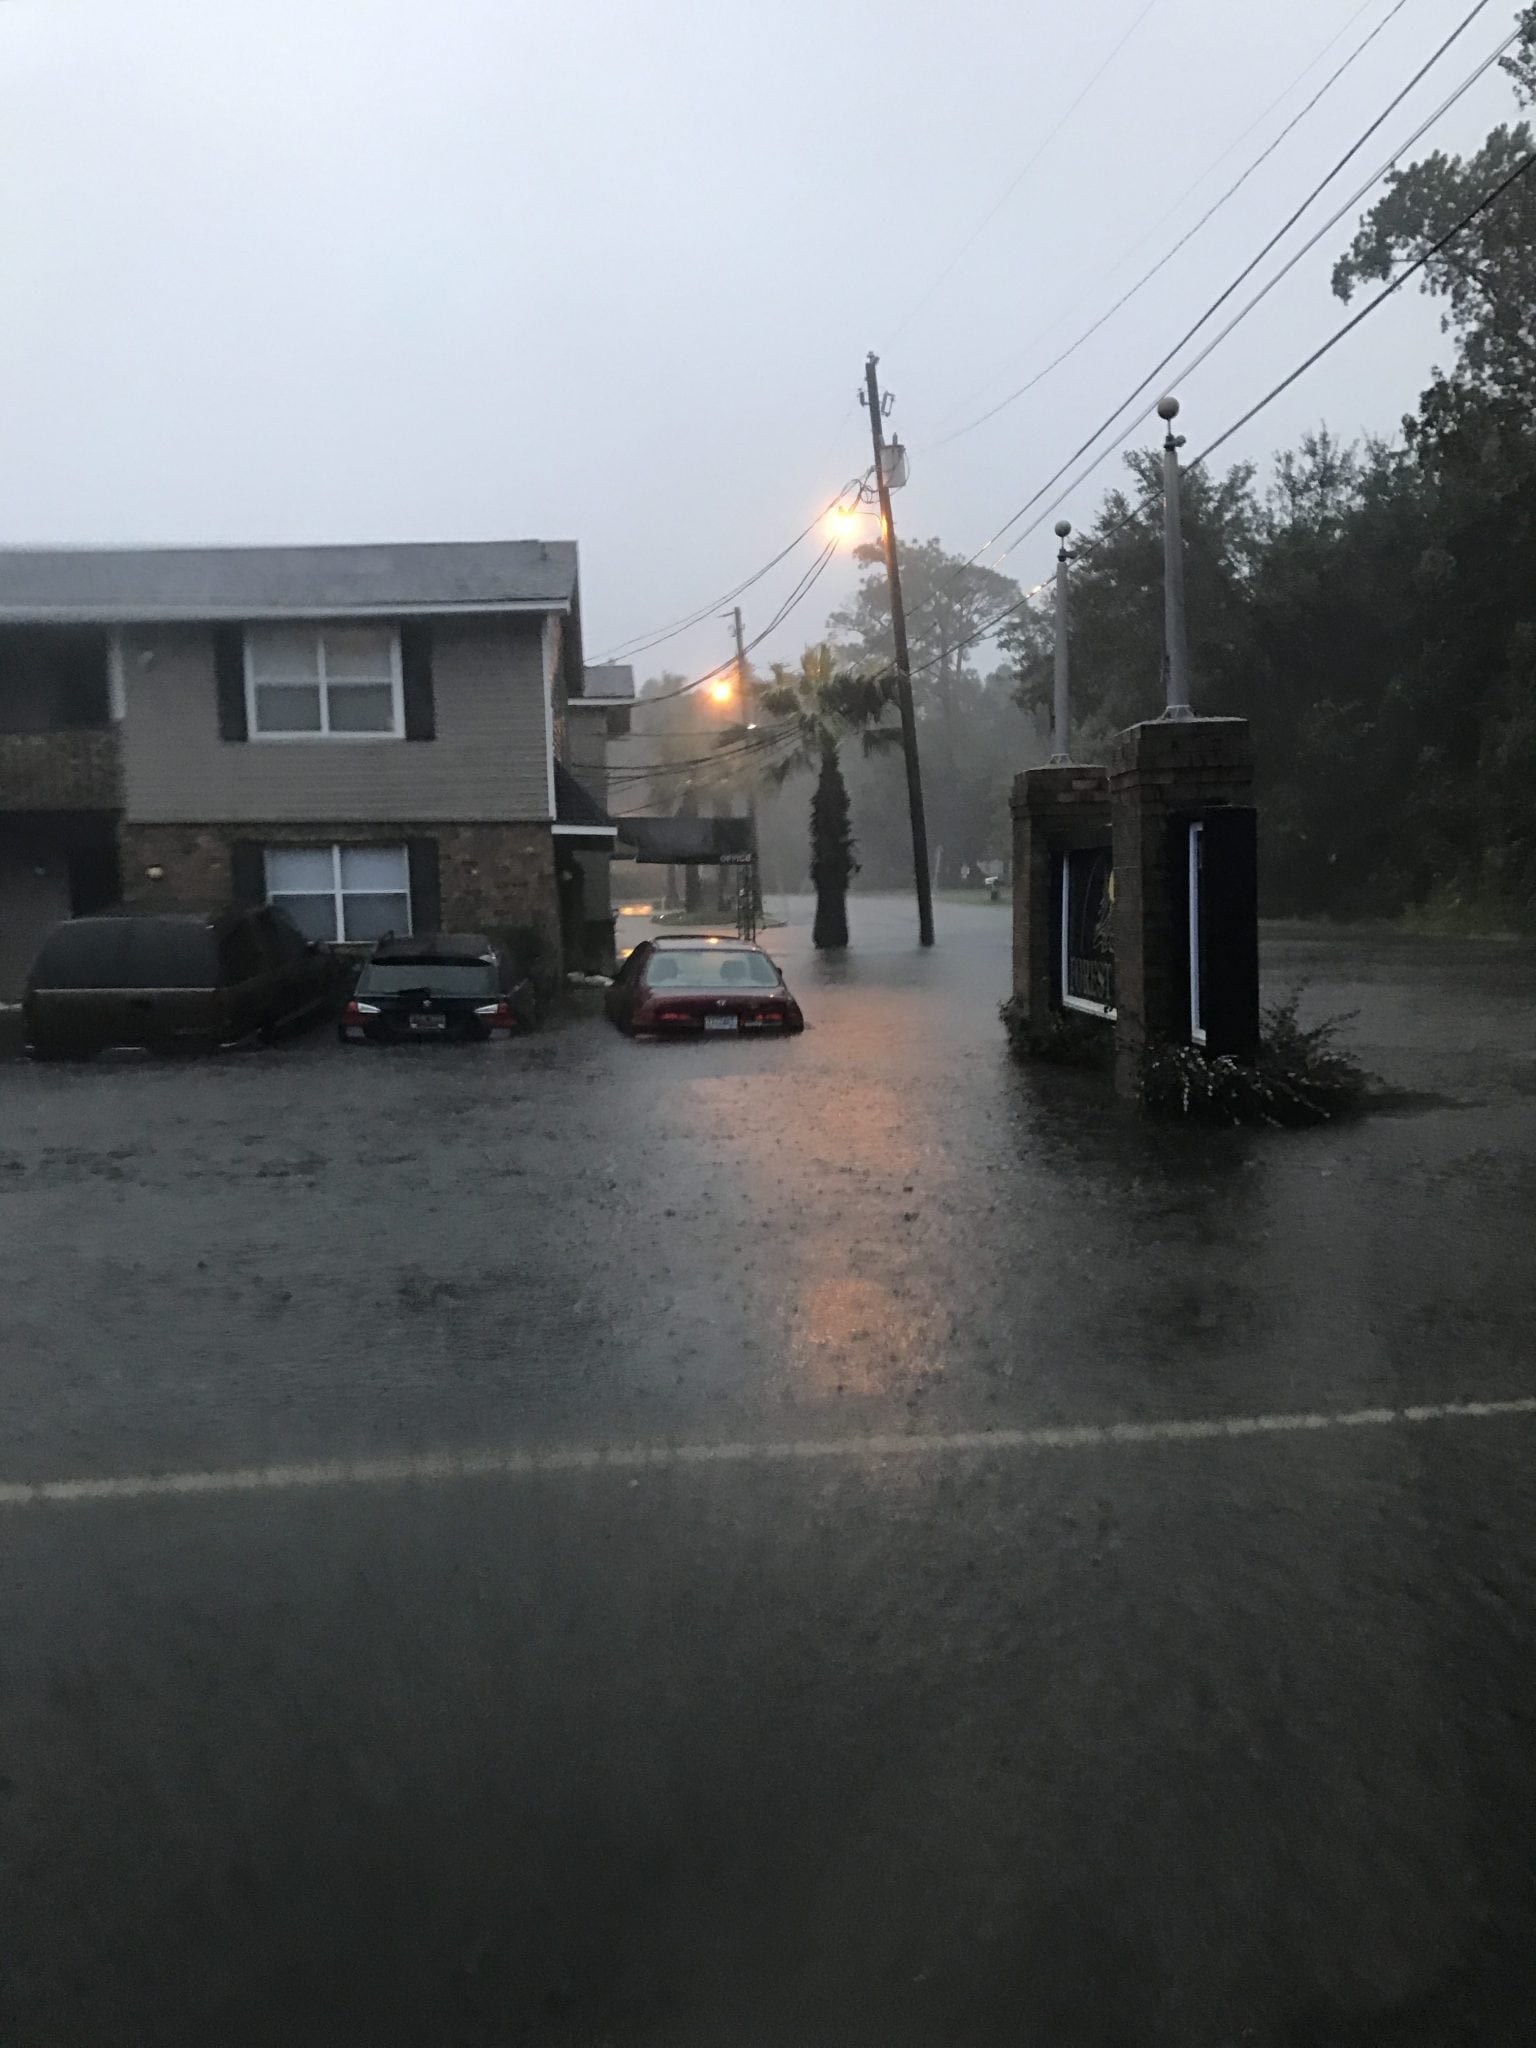 Flooding in the City of Hanahan